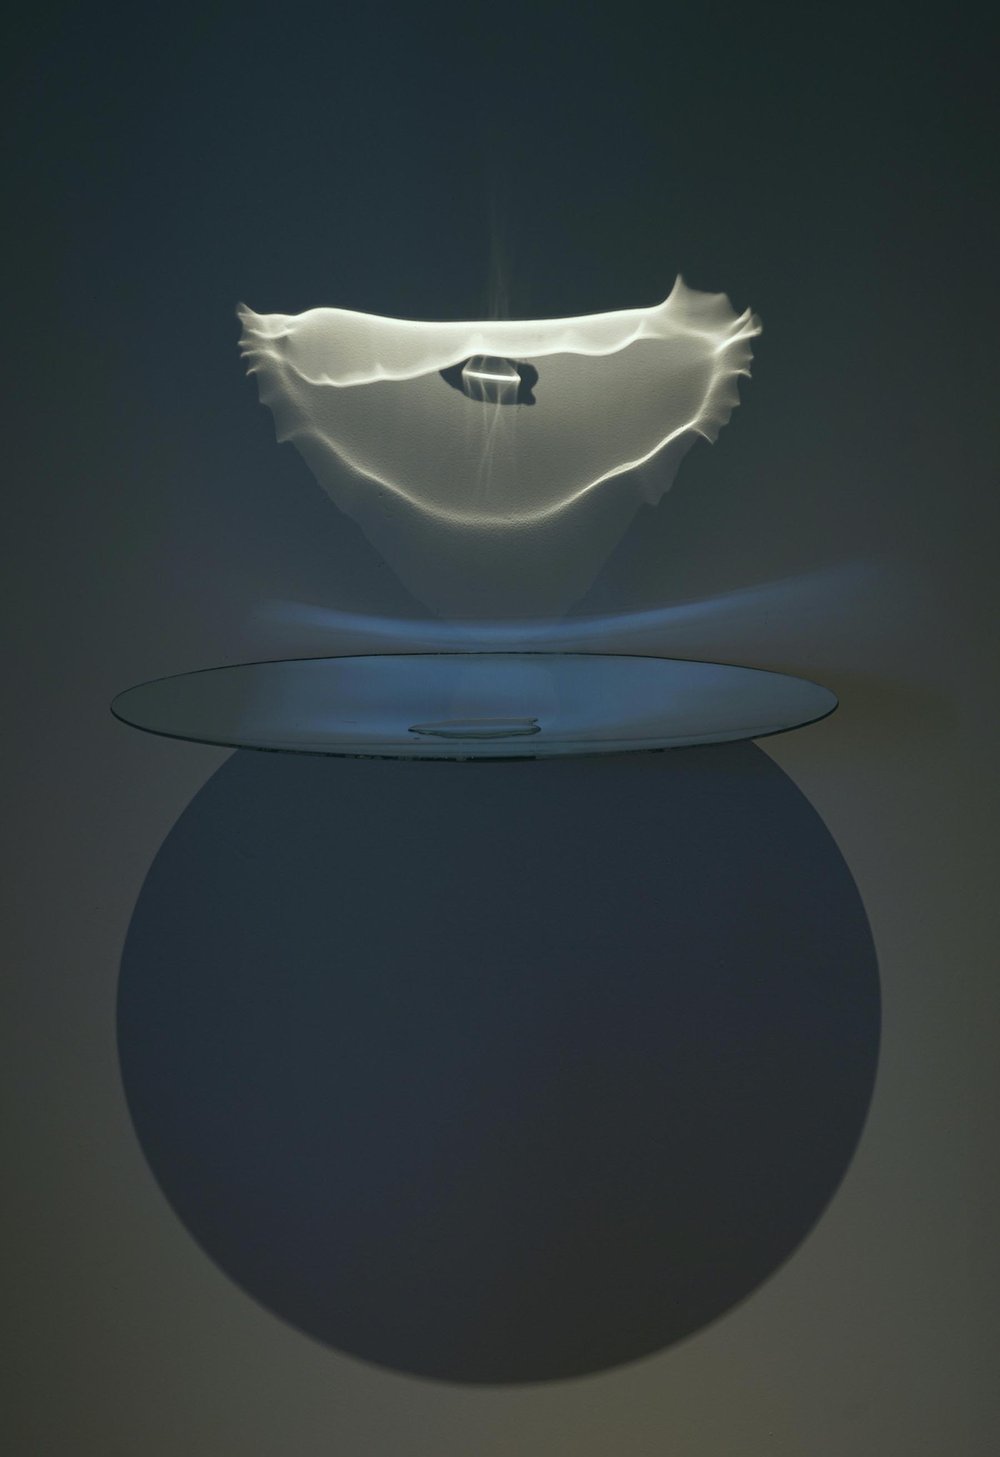 SOLITUDE (2021) | Glass, LED lights, water | 20 × 14 × 14 in.